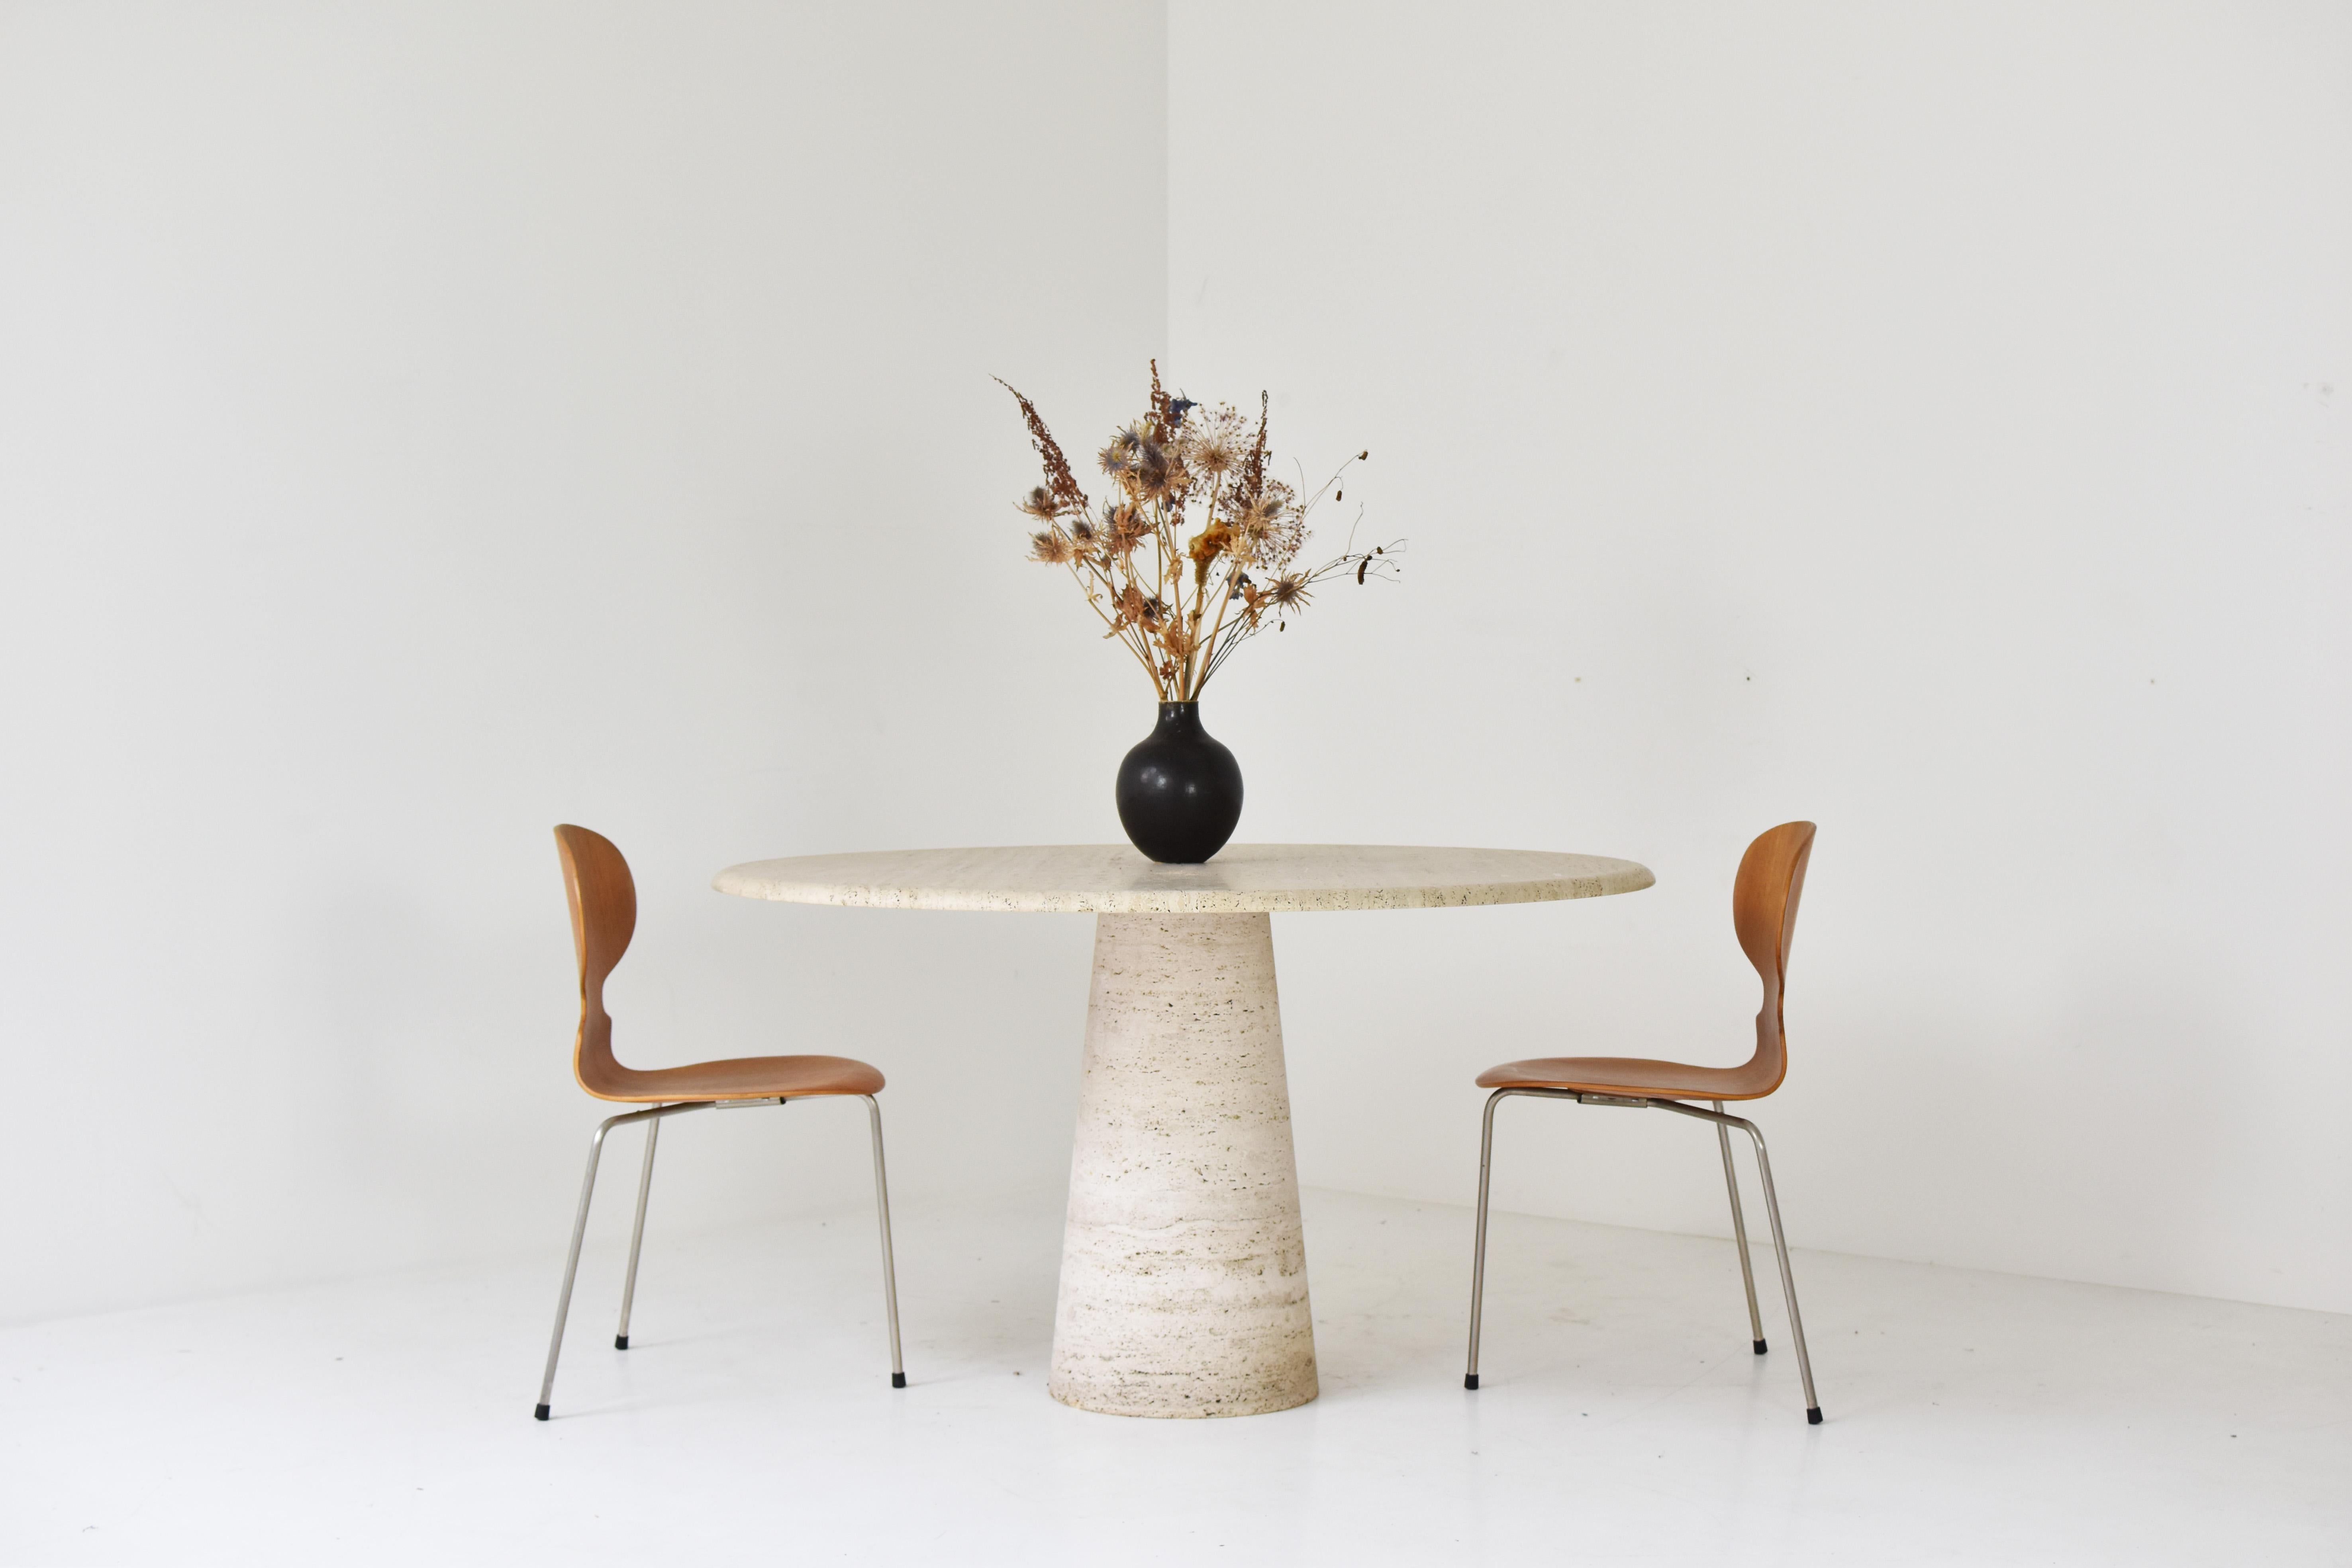 Travertine dining table by Up & Up, Italy 1970’s. The table is fully made out of travertine with variegated tones of beige and brown. The top rests on a unique cylinder shaped pedestal base. Very well presented original condition with only minor